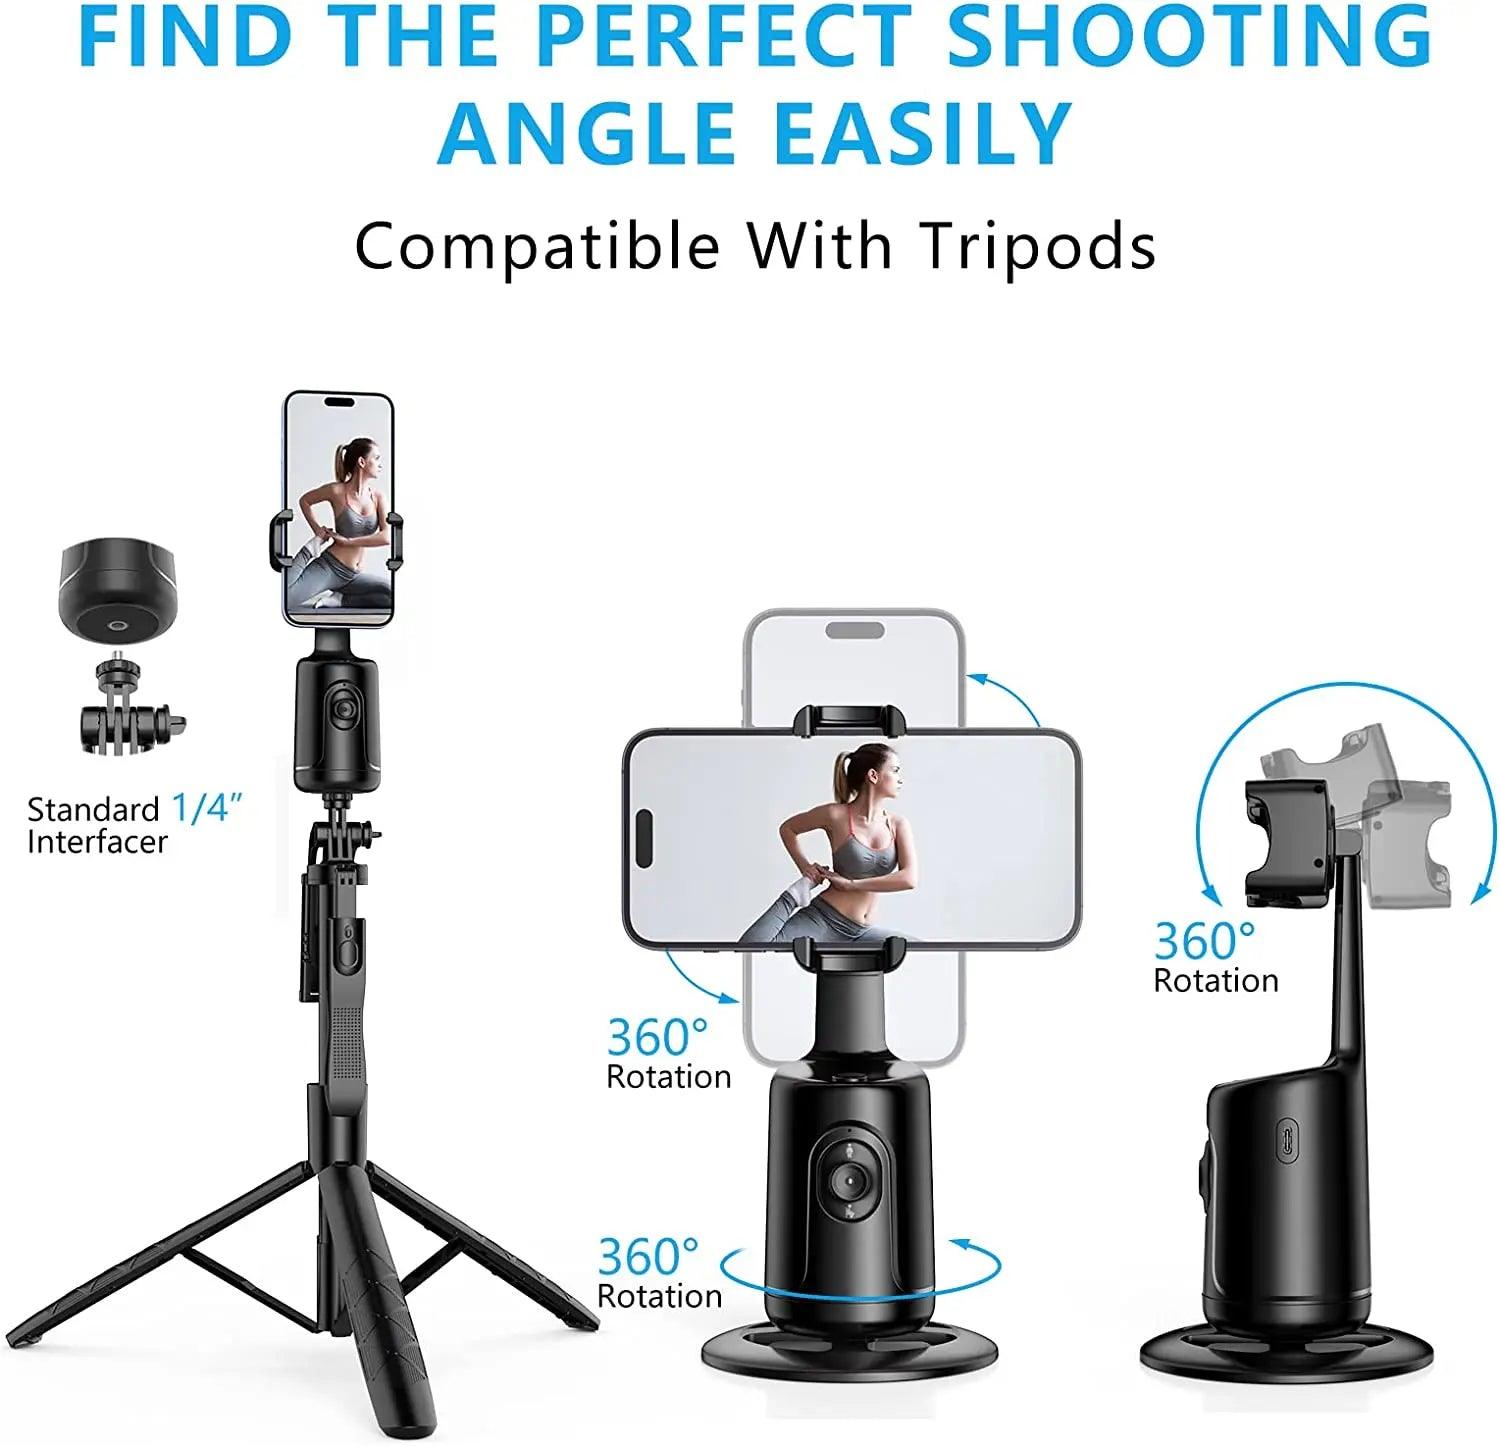 Auto Tracking Shooting Gimbal with Face Recognition